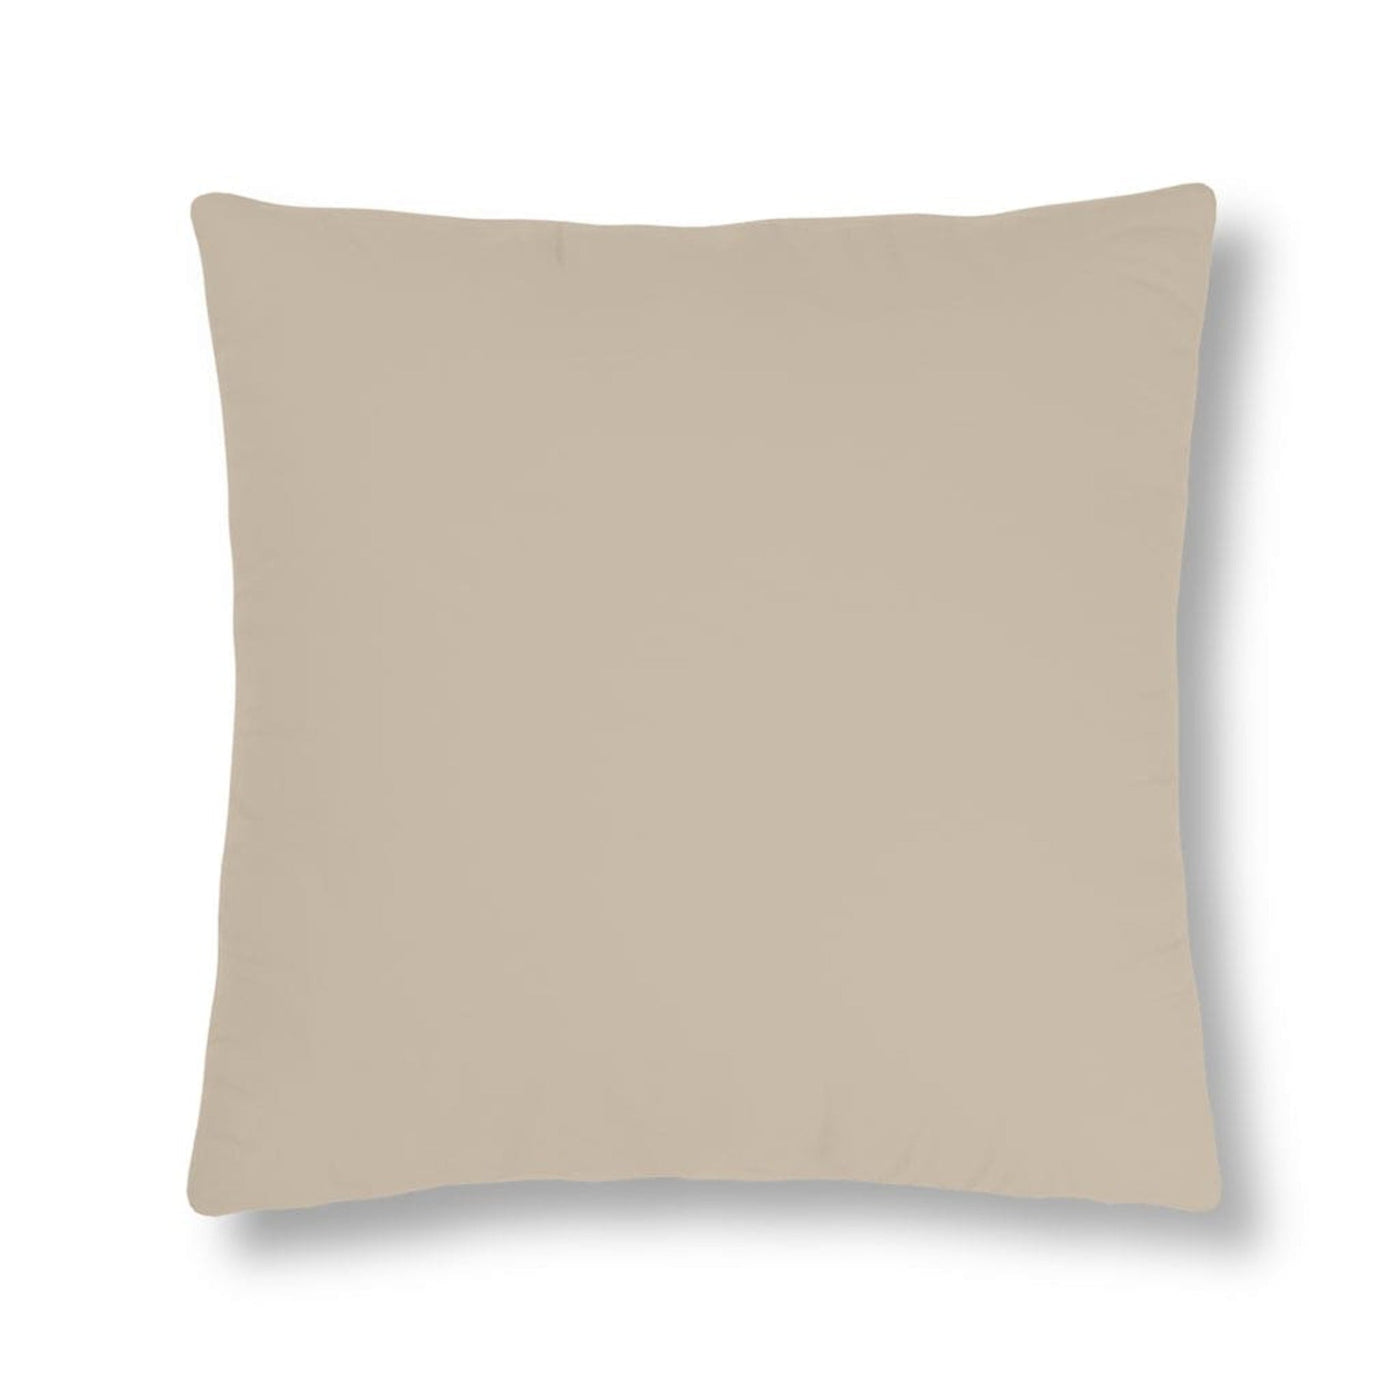 Indoor Or Outdoor Throw Pillow For Home Or Housewarming Gift Taupe Beige -